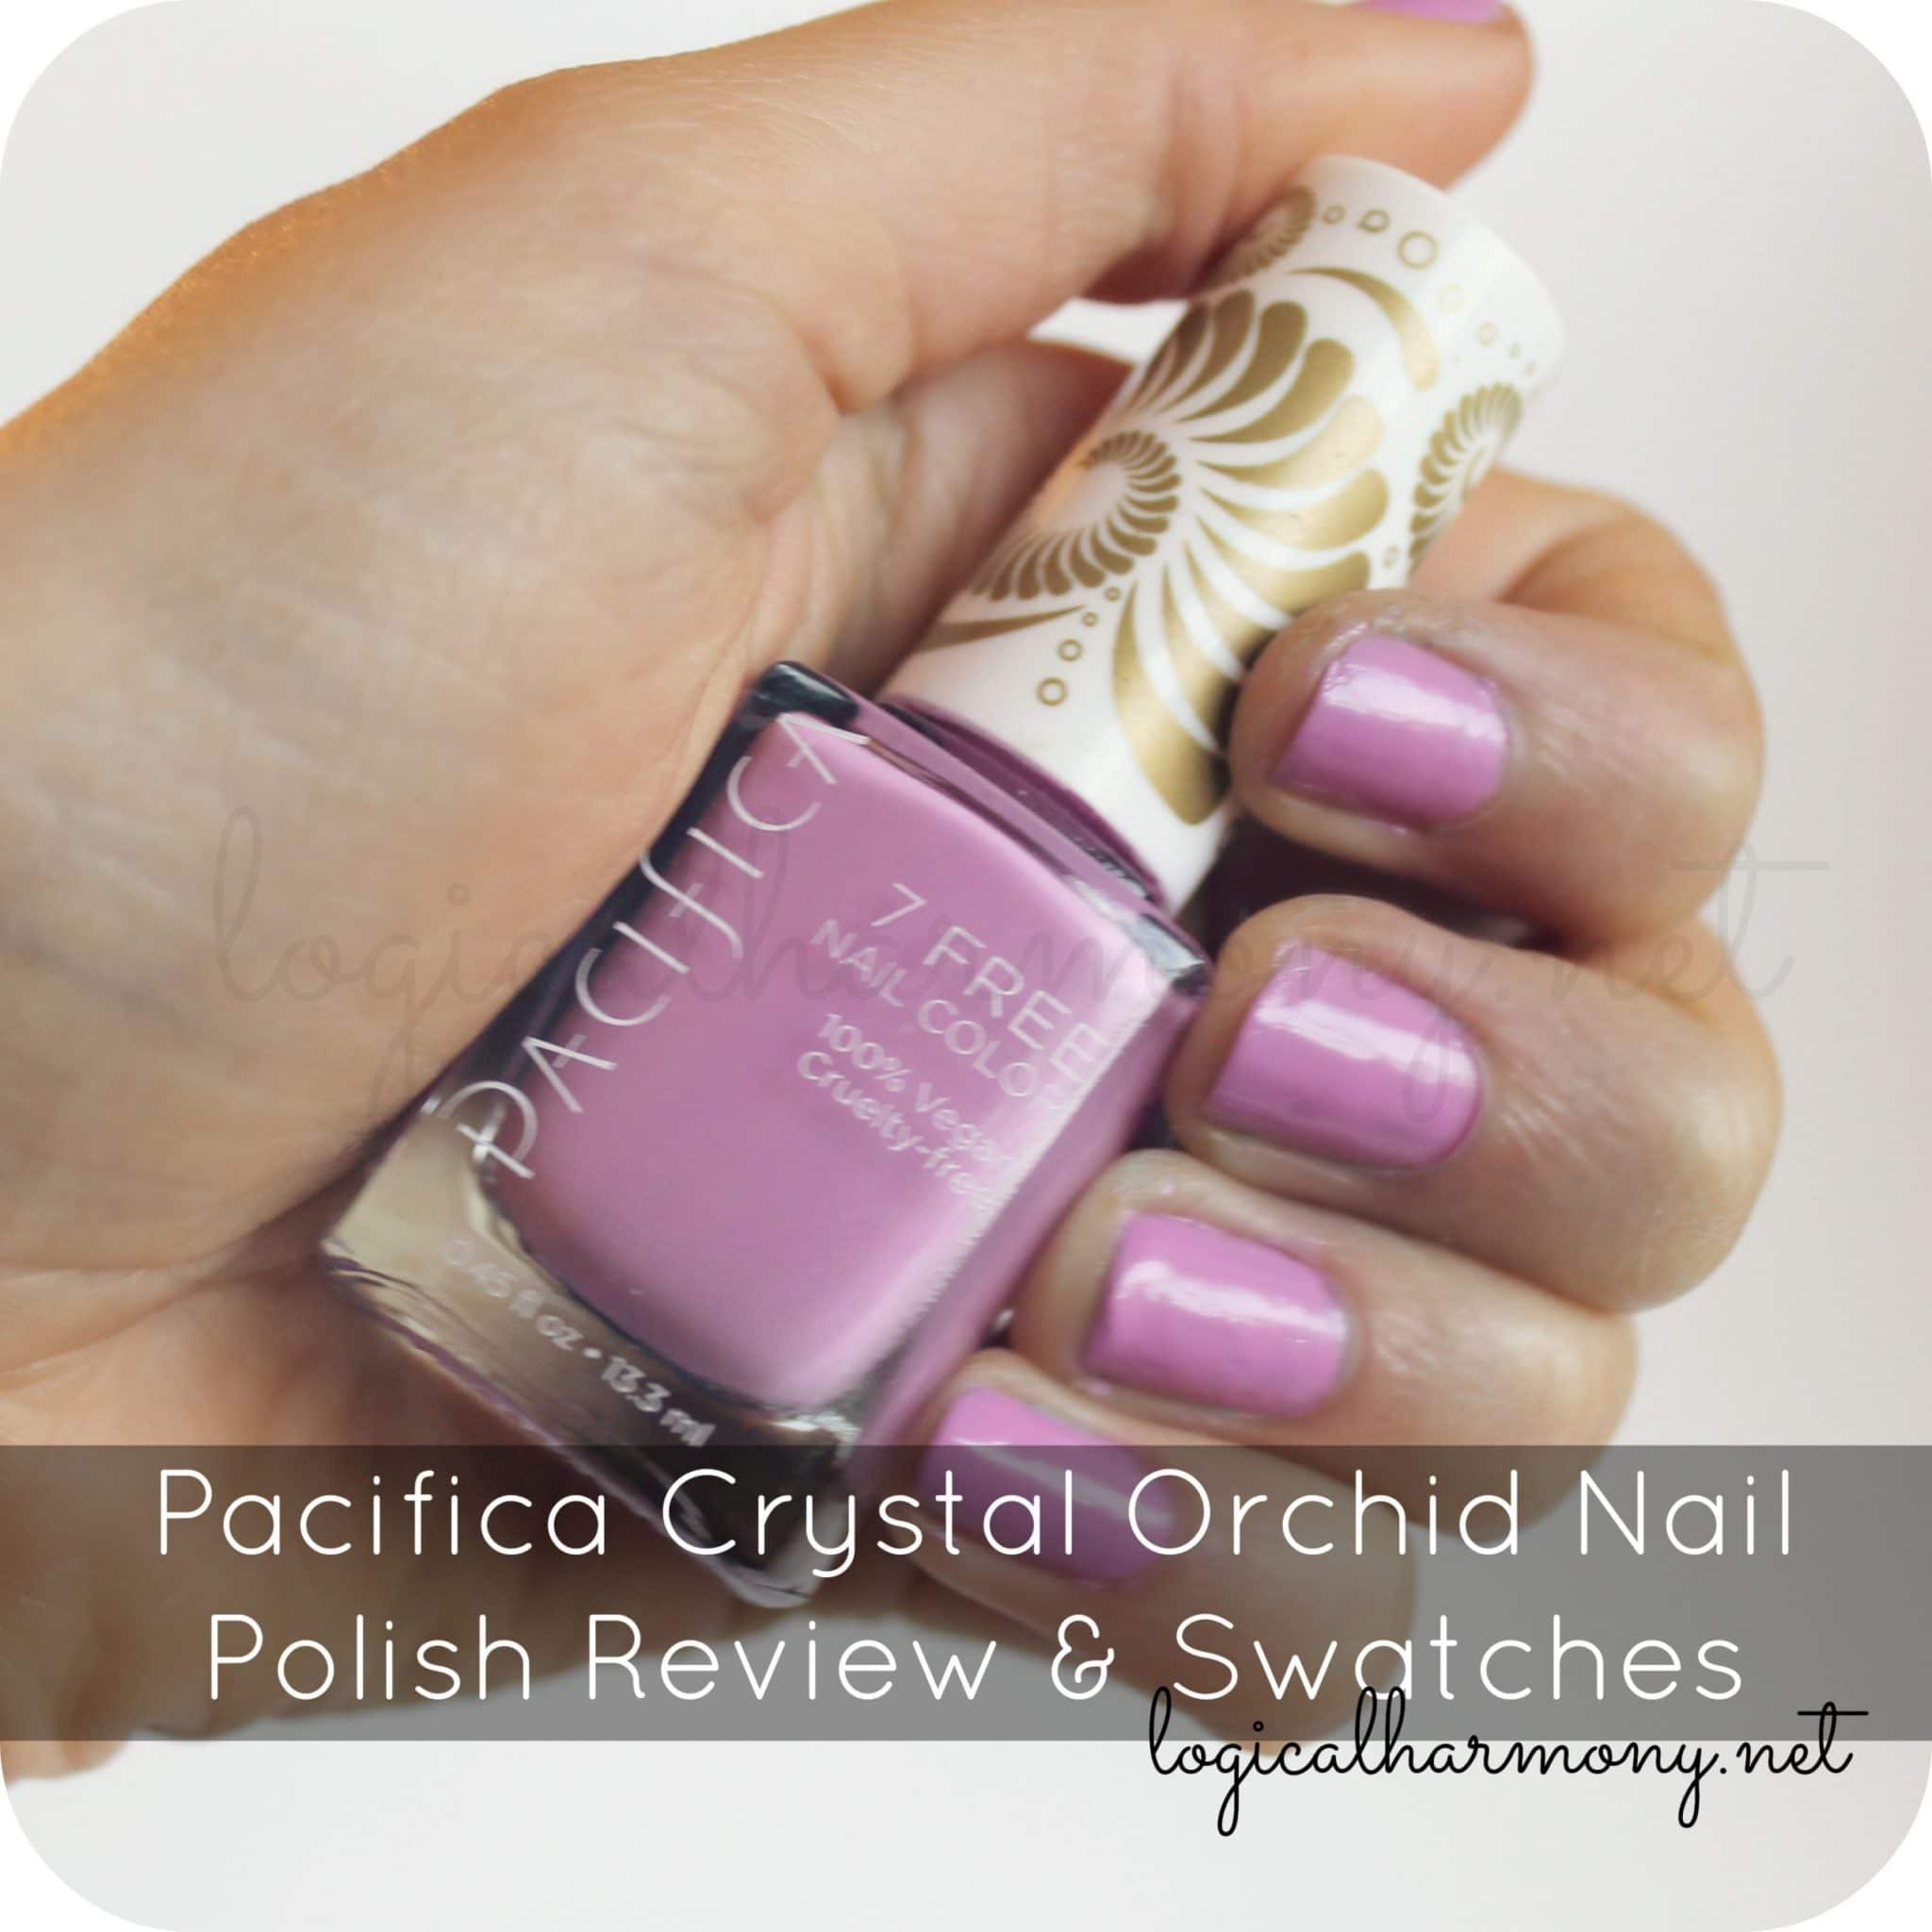 Pacifica Crystal Orchid Nail Polish Review & Swatches